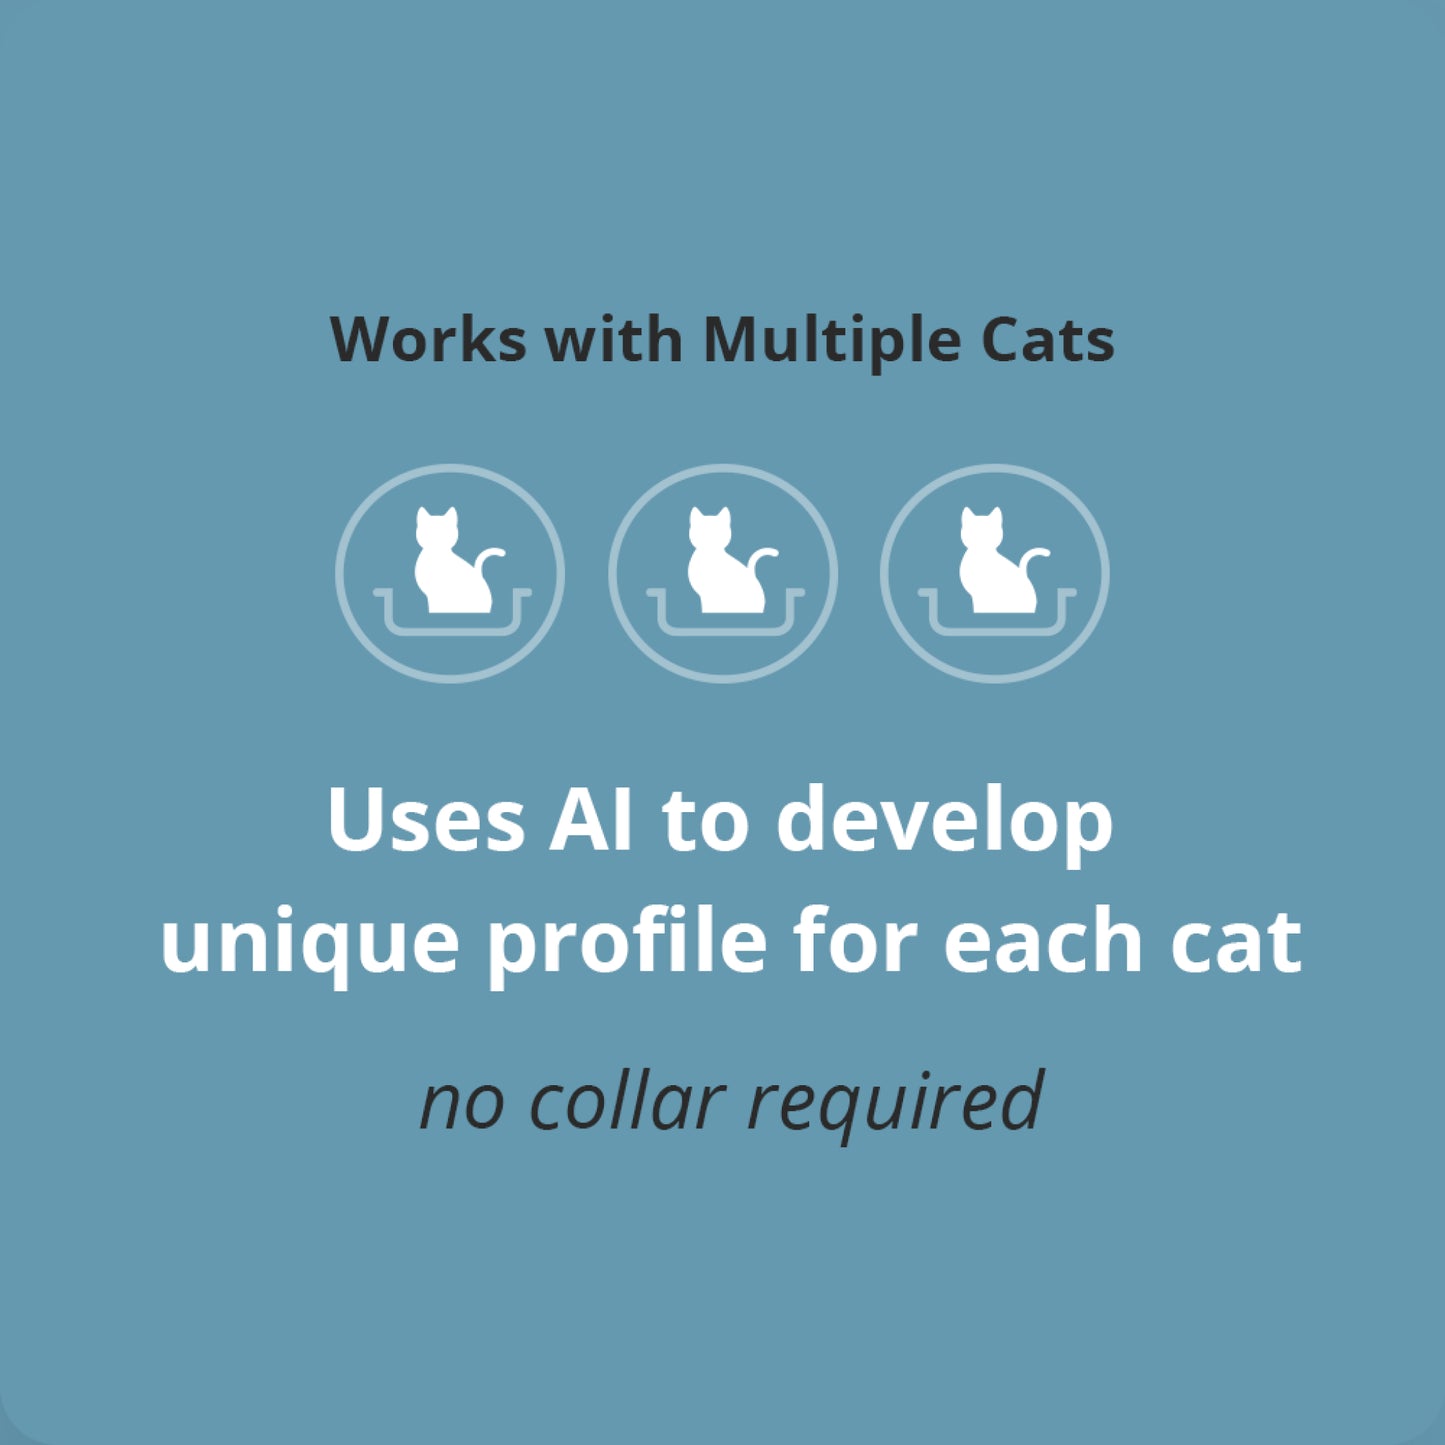 Works with multiple cats | Uses AI to develop unique profile for each cat | no collar required